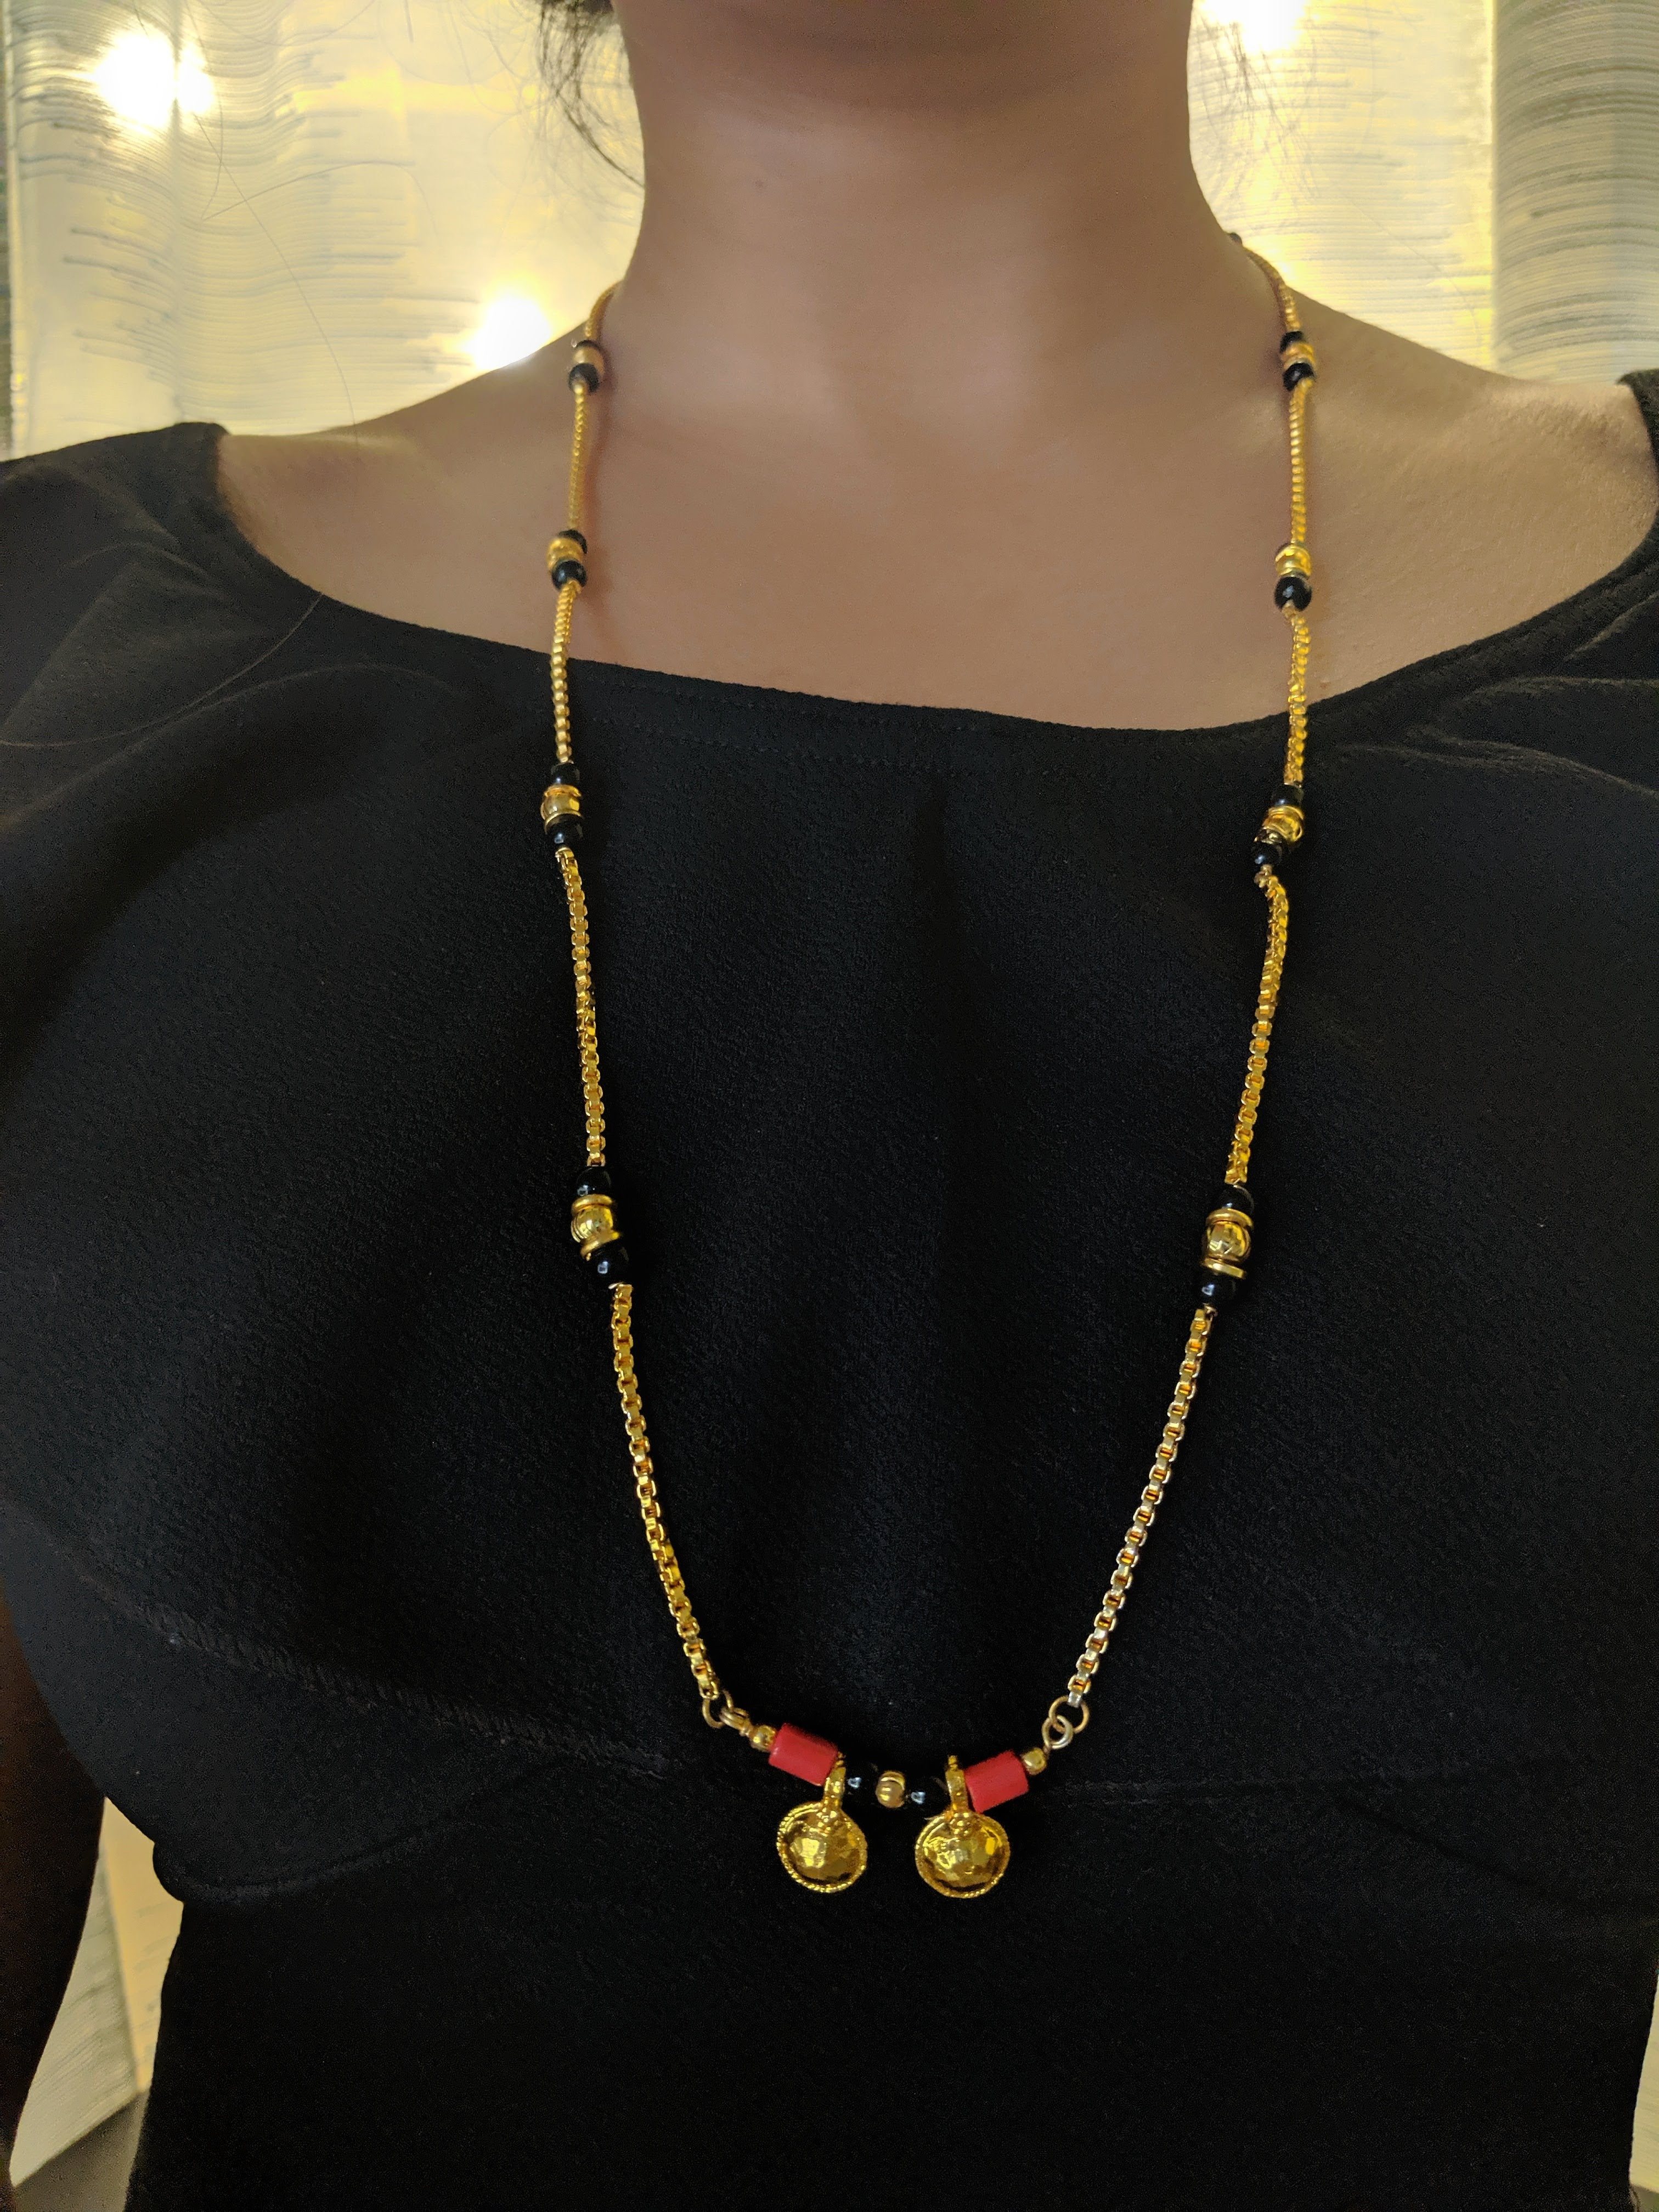 image for Traditional South Indian Long Mangalsutra Vati Designs Red And Black Beads Gold Chain